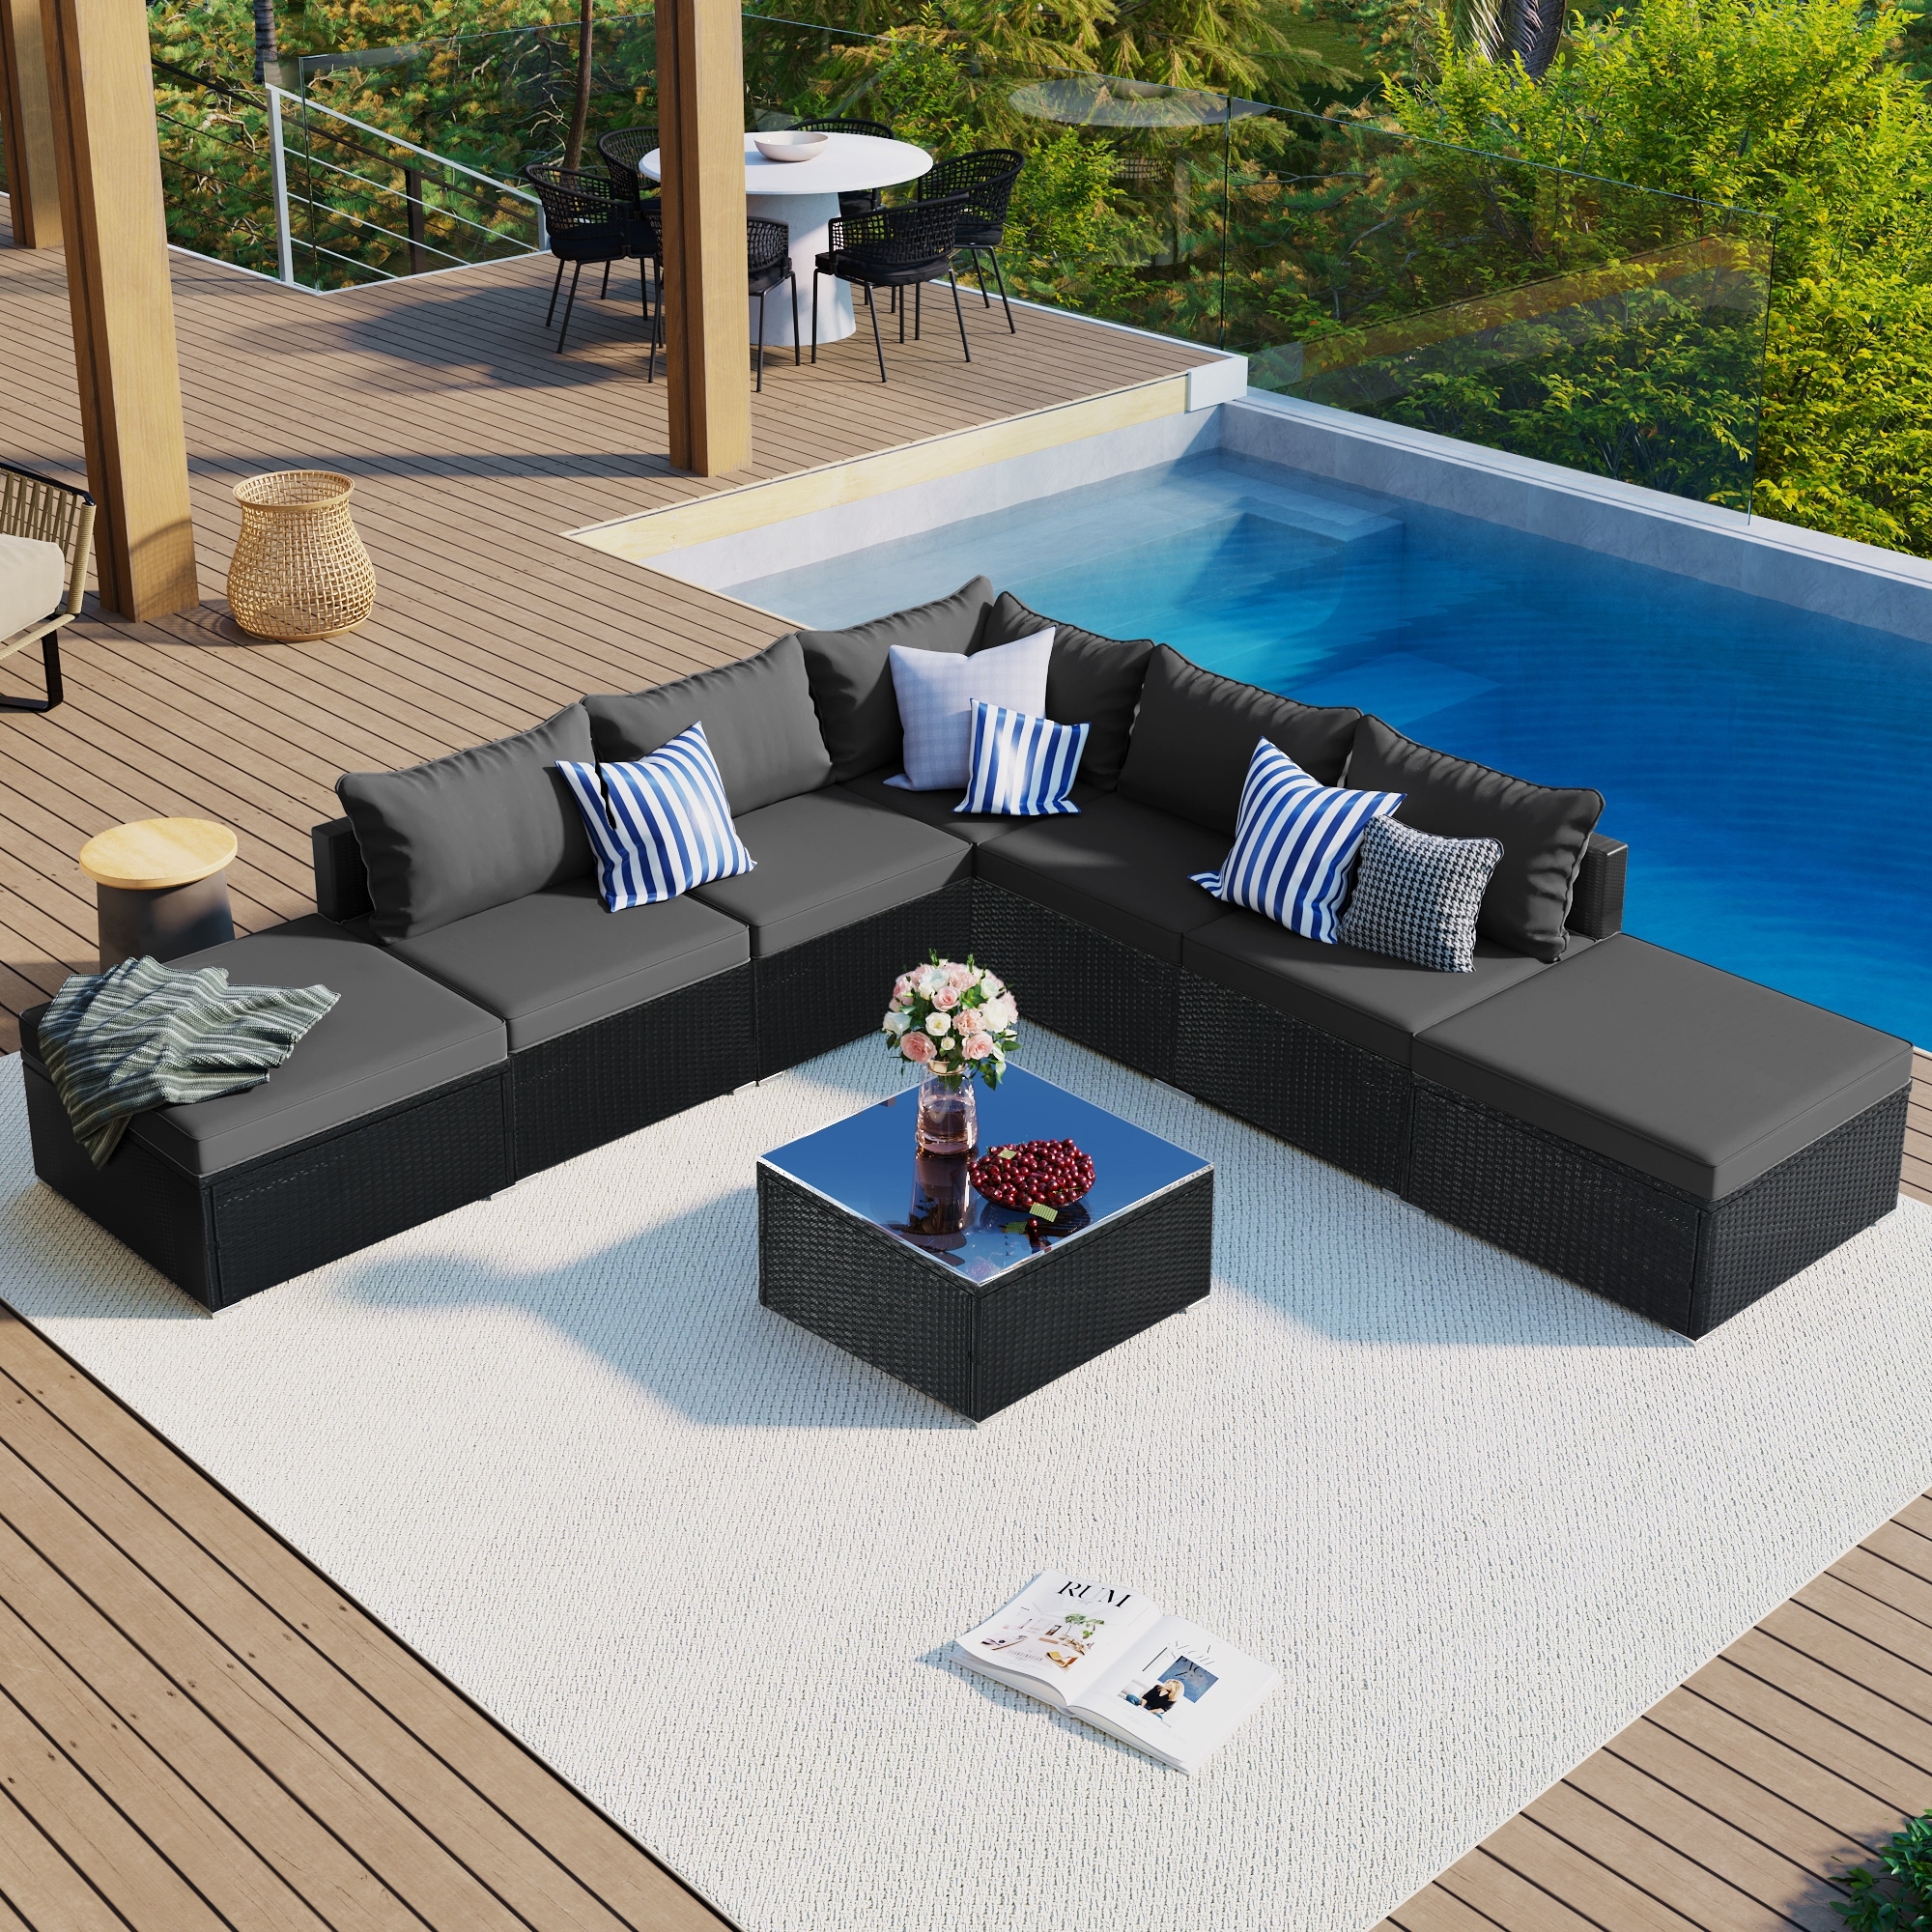 8-pieces Outdoor Patio Furniture Sets For 5-8  Garden Sofa Set With 1 Corner Sofa  4 Single Sofas  2 Ottomans and 1 Coffee Table.